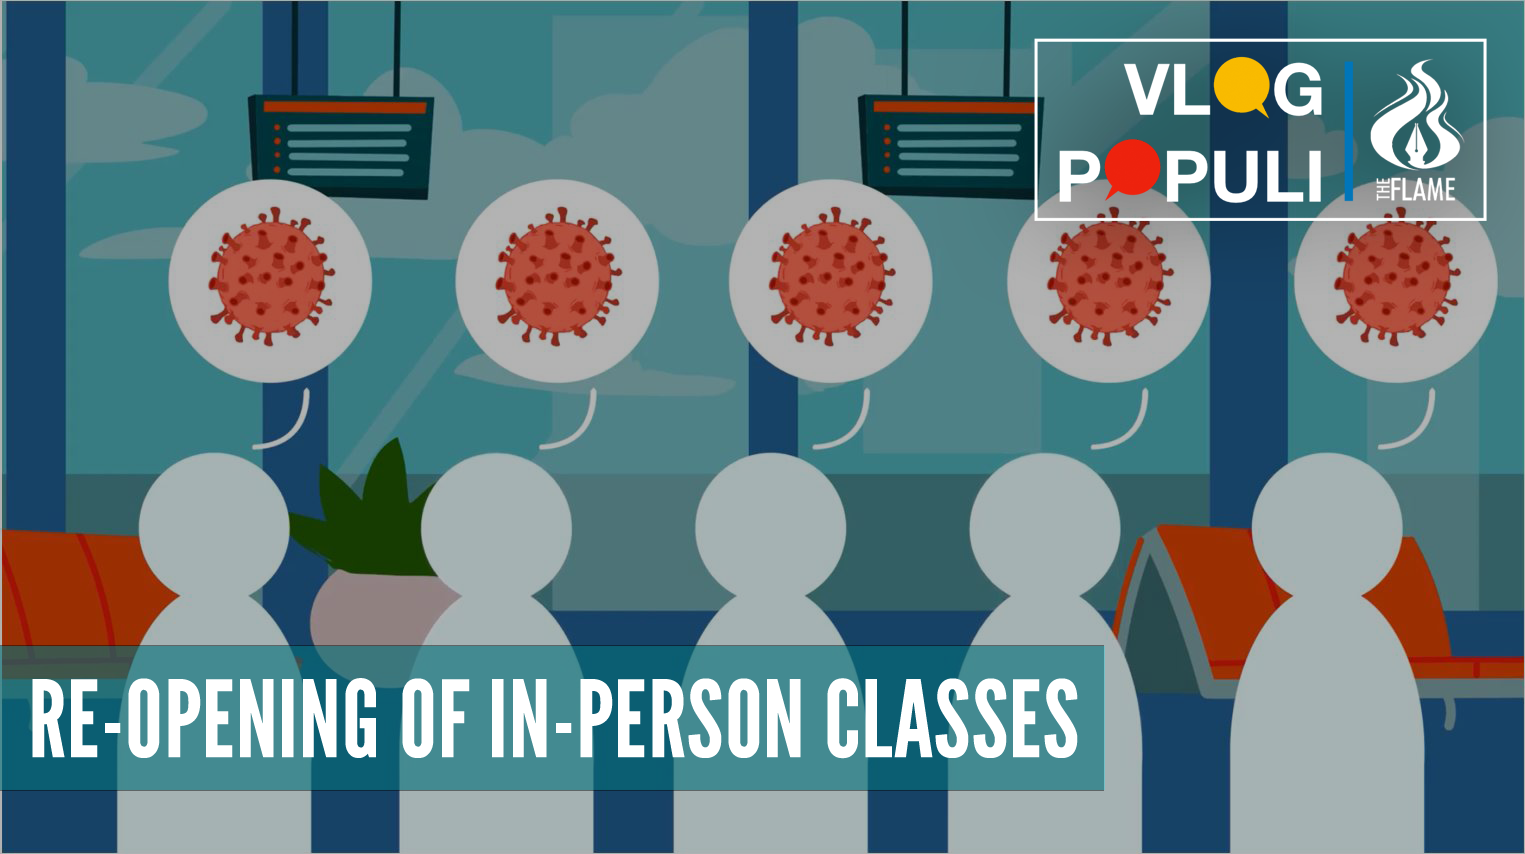 VLOG POPULI: Resumption of limited face-to-face classes